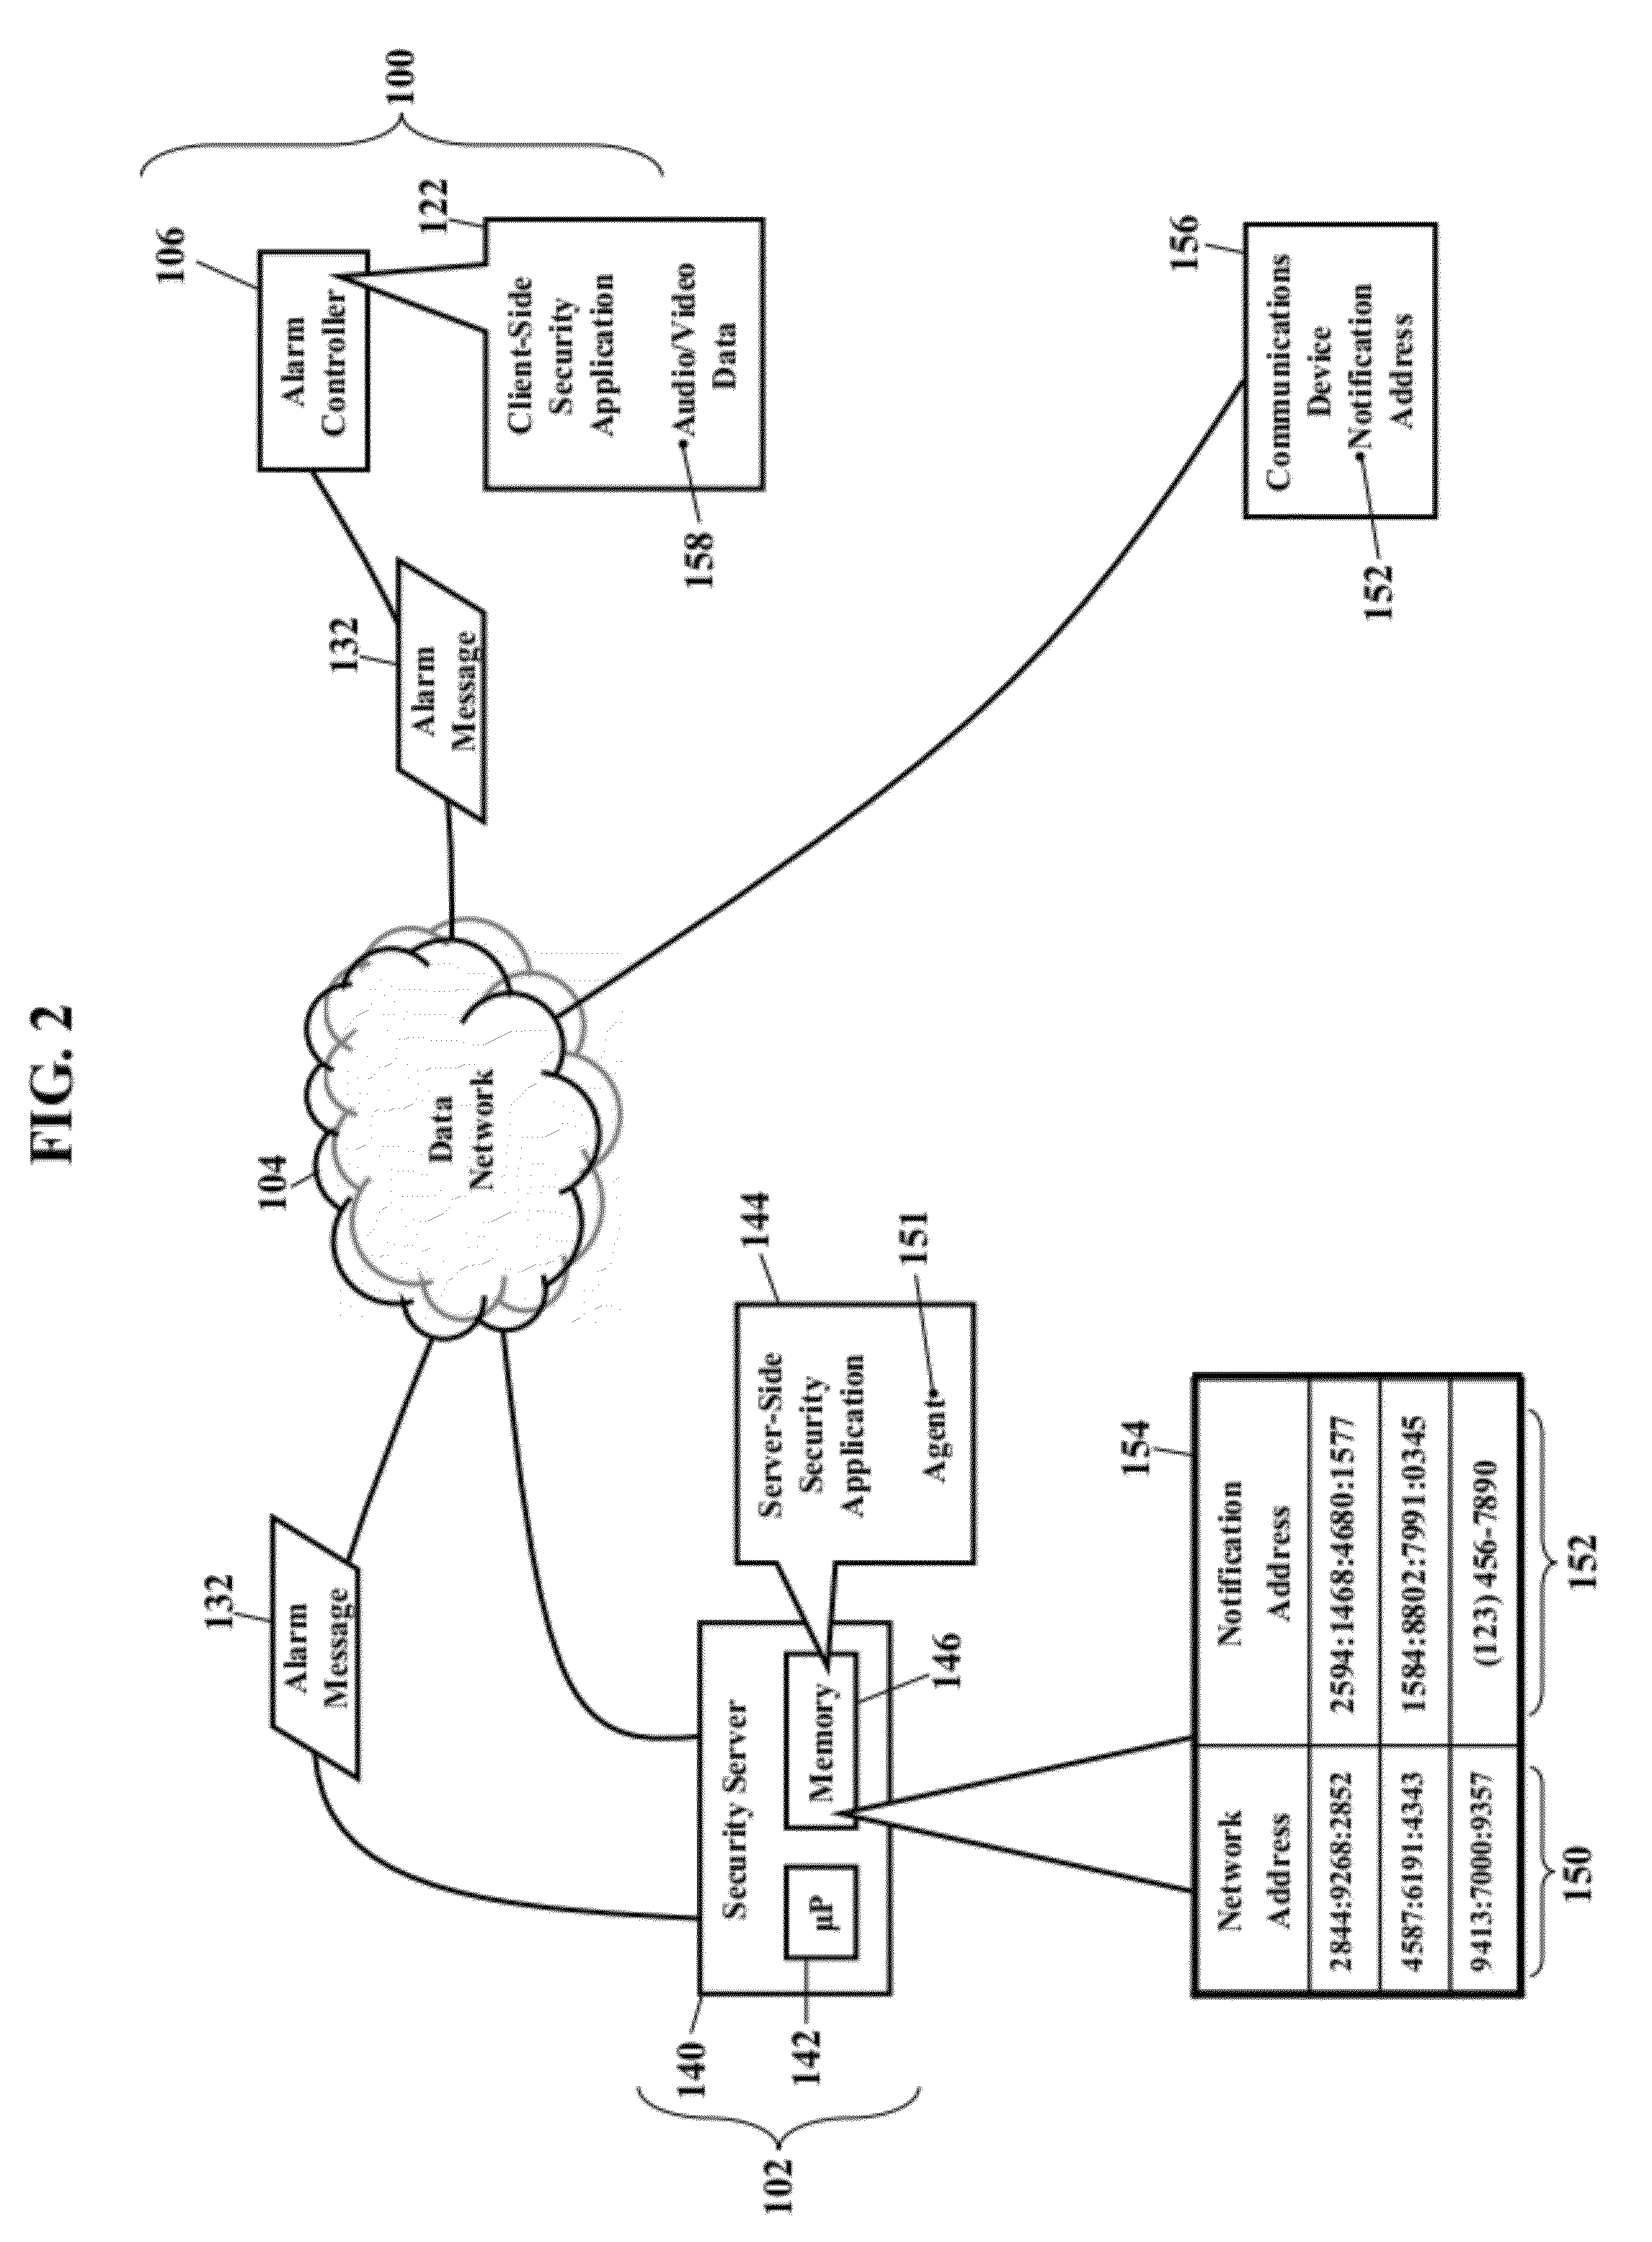 Methods, systems, and products for security systems